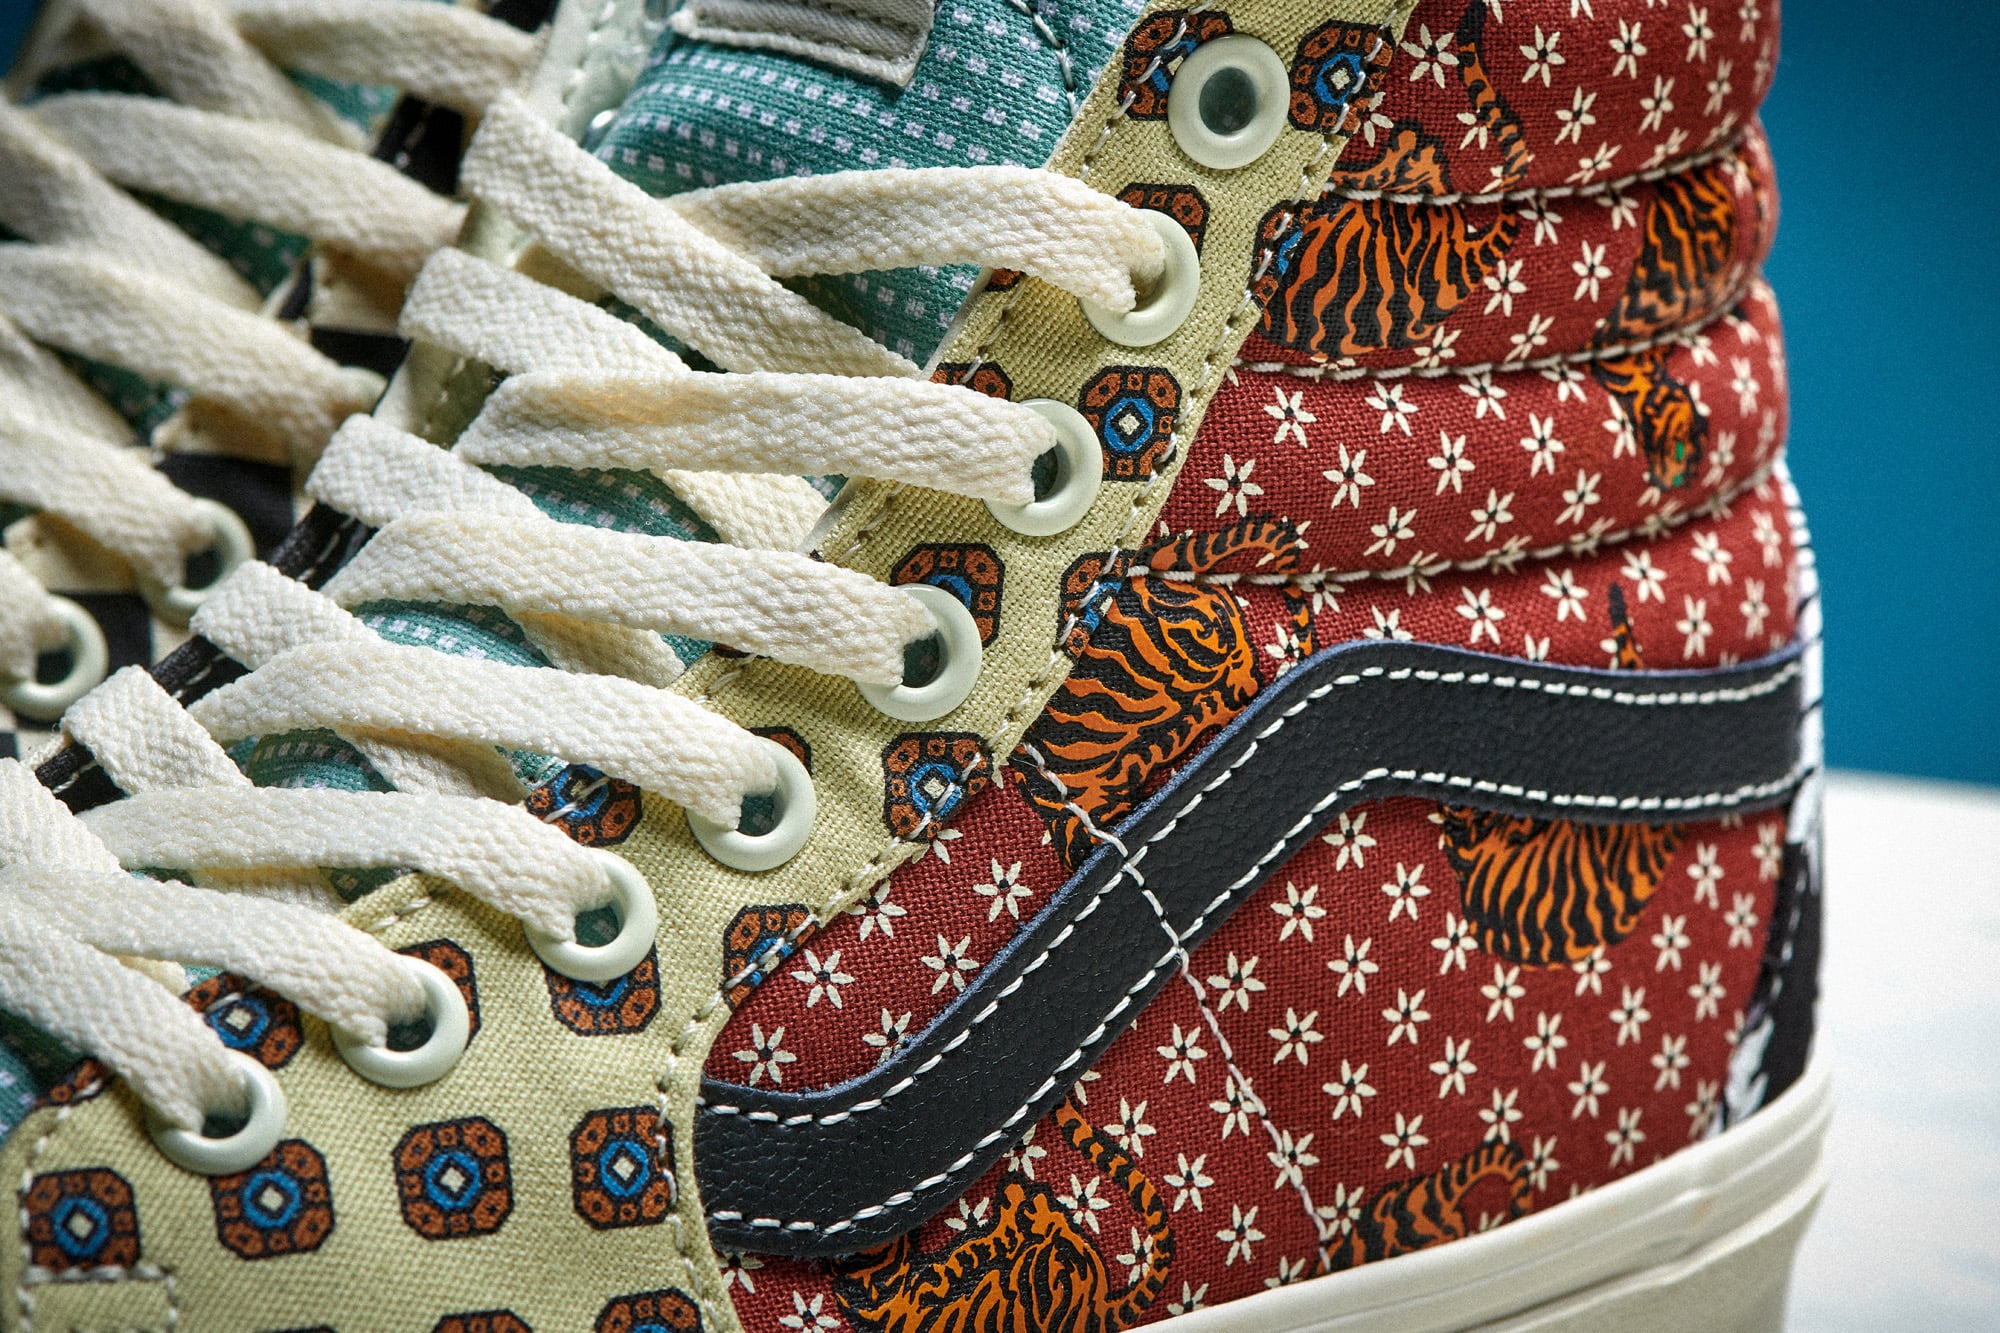 Vans is sprucing up some classics in the new Tiger Patchwork